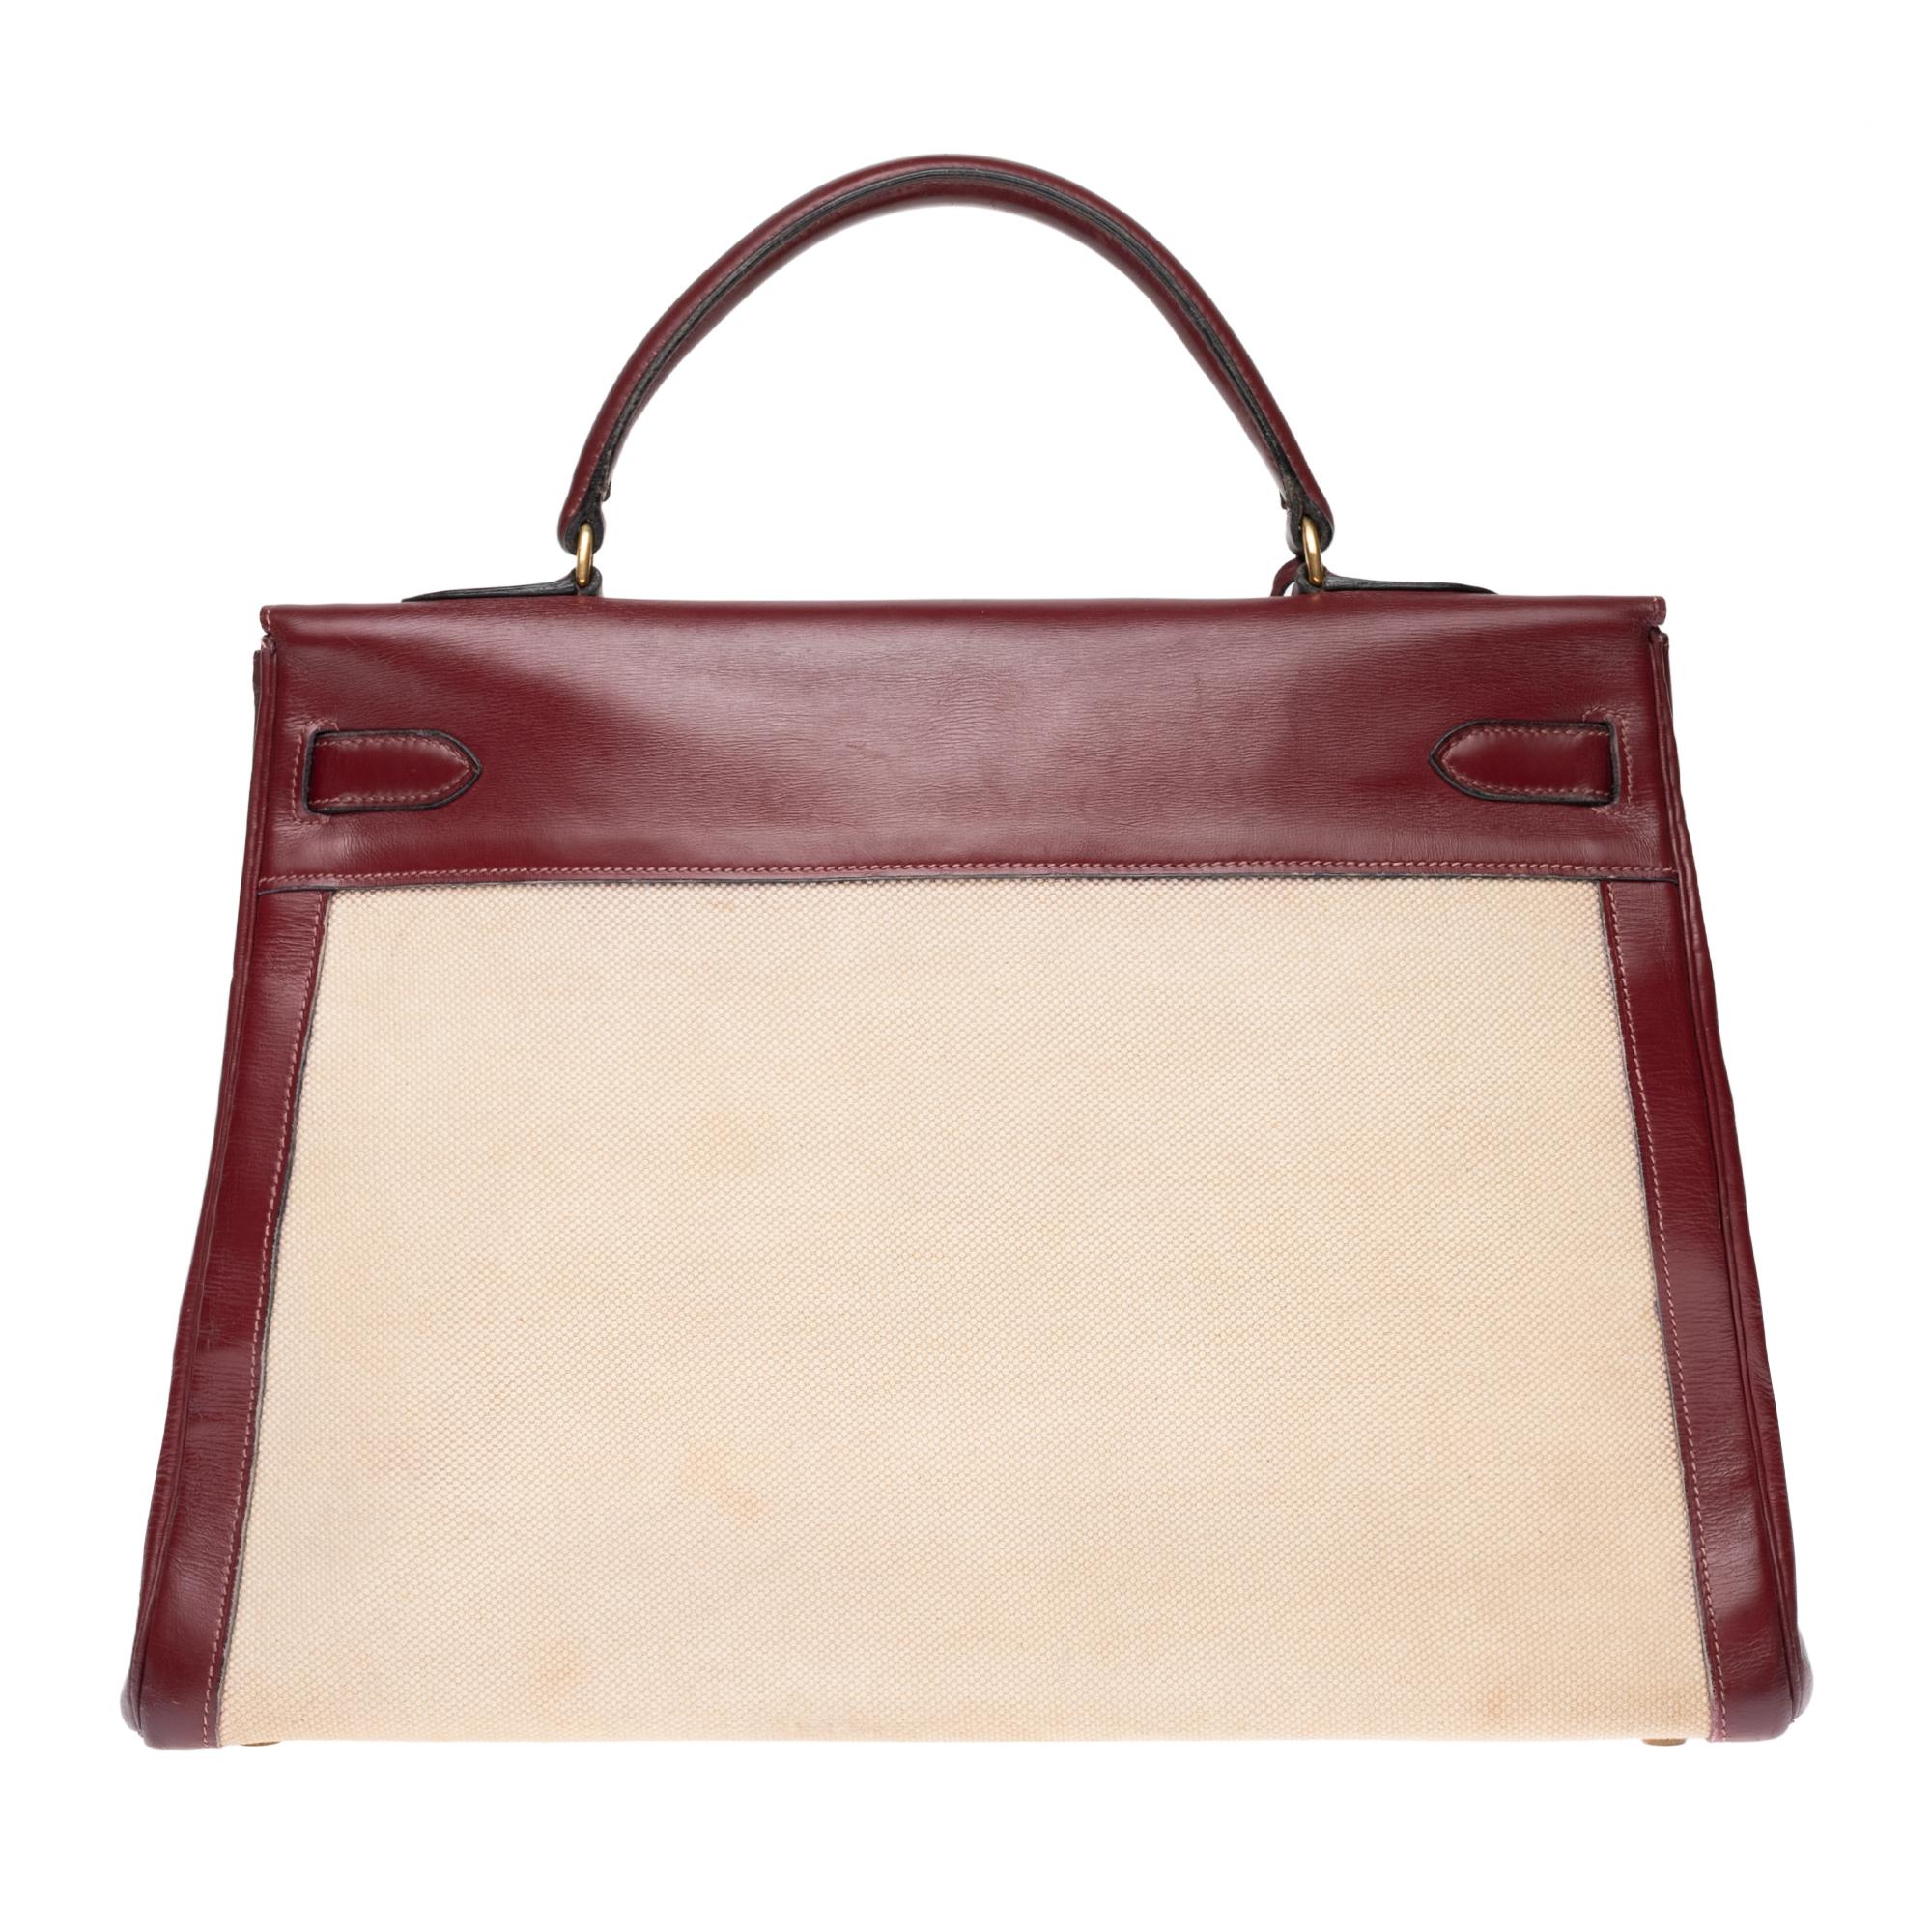 Charming Hermes Kelly handbag 35 cm bi-material in burgundy calf box leather and beige canvas, gilded metal trim, burgundy leather handle allowing a handheld.

Closure by flap.
Interior lining in burgundy leather, a large veneered pocket, a double